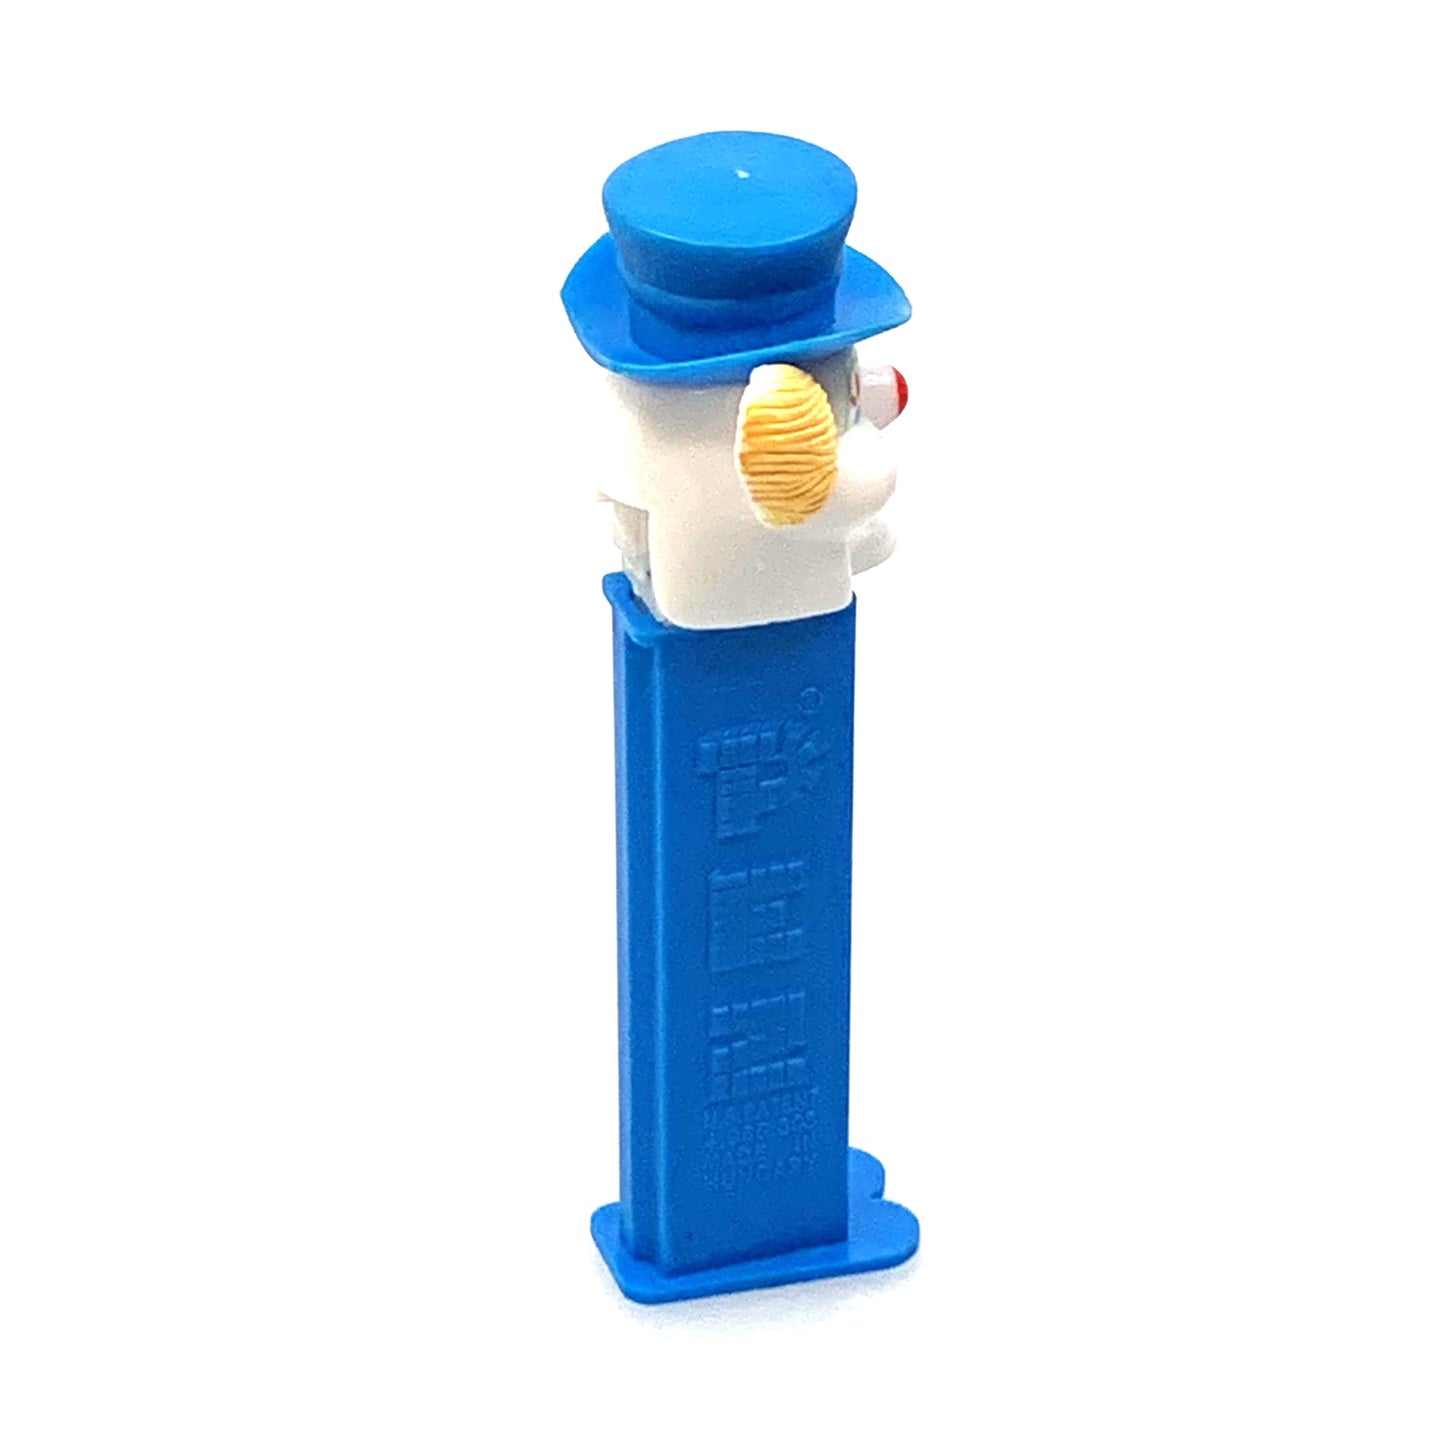 Pez Dispenser | Peter The Clown - Hungary | Color: Blue | Pre-Owned